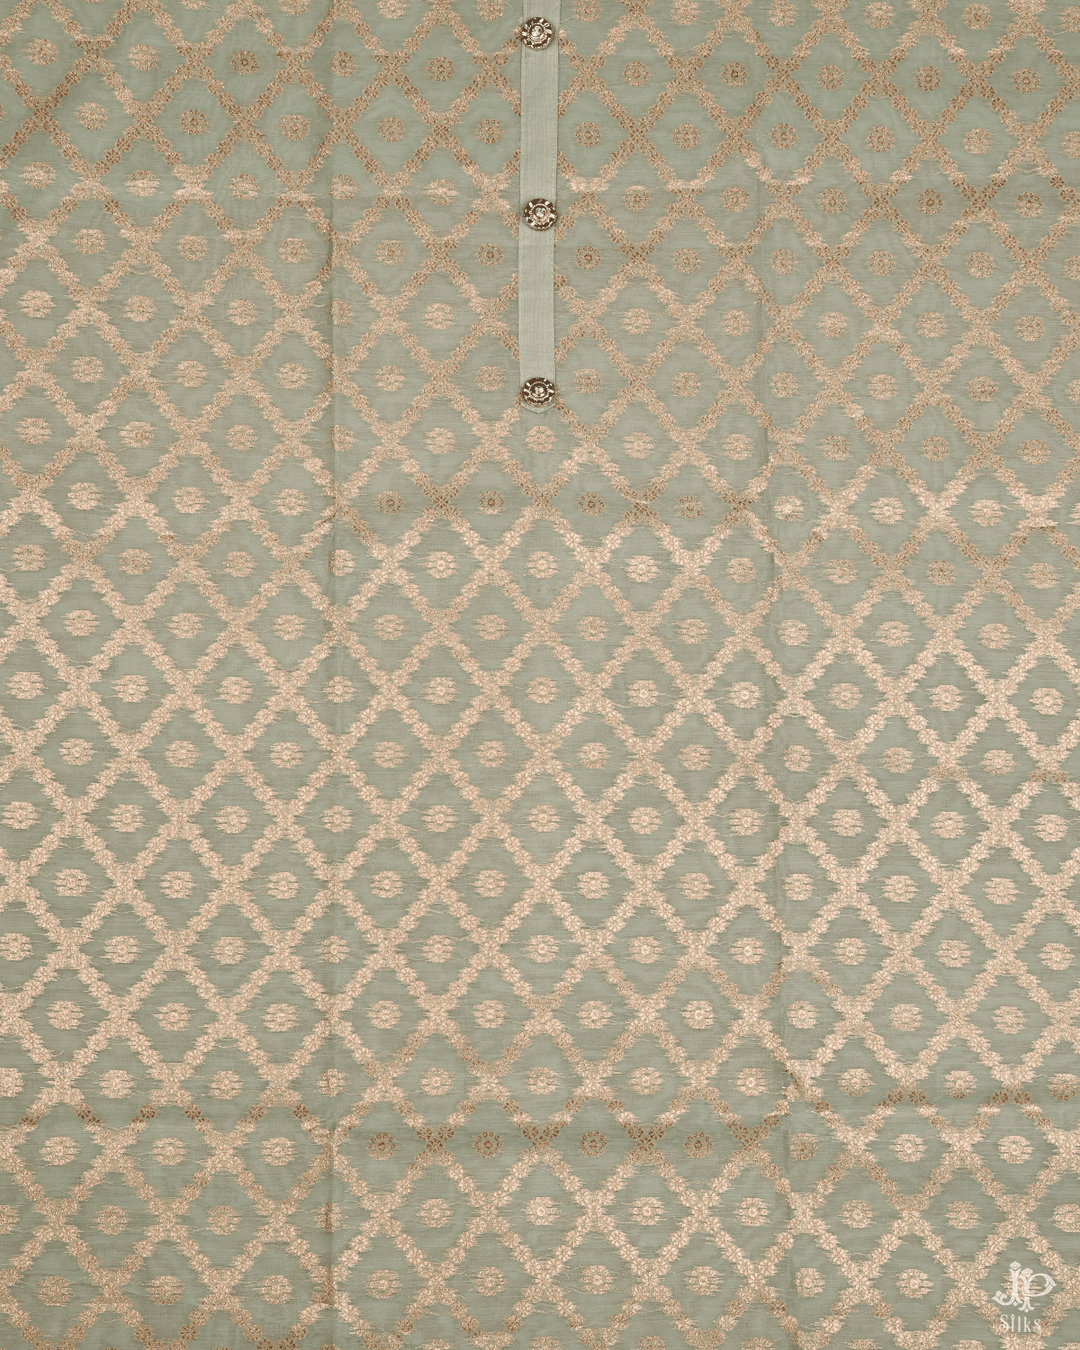 Pista Green and Beige Unstitched Chudidhar Material - D5207 - View 2